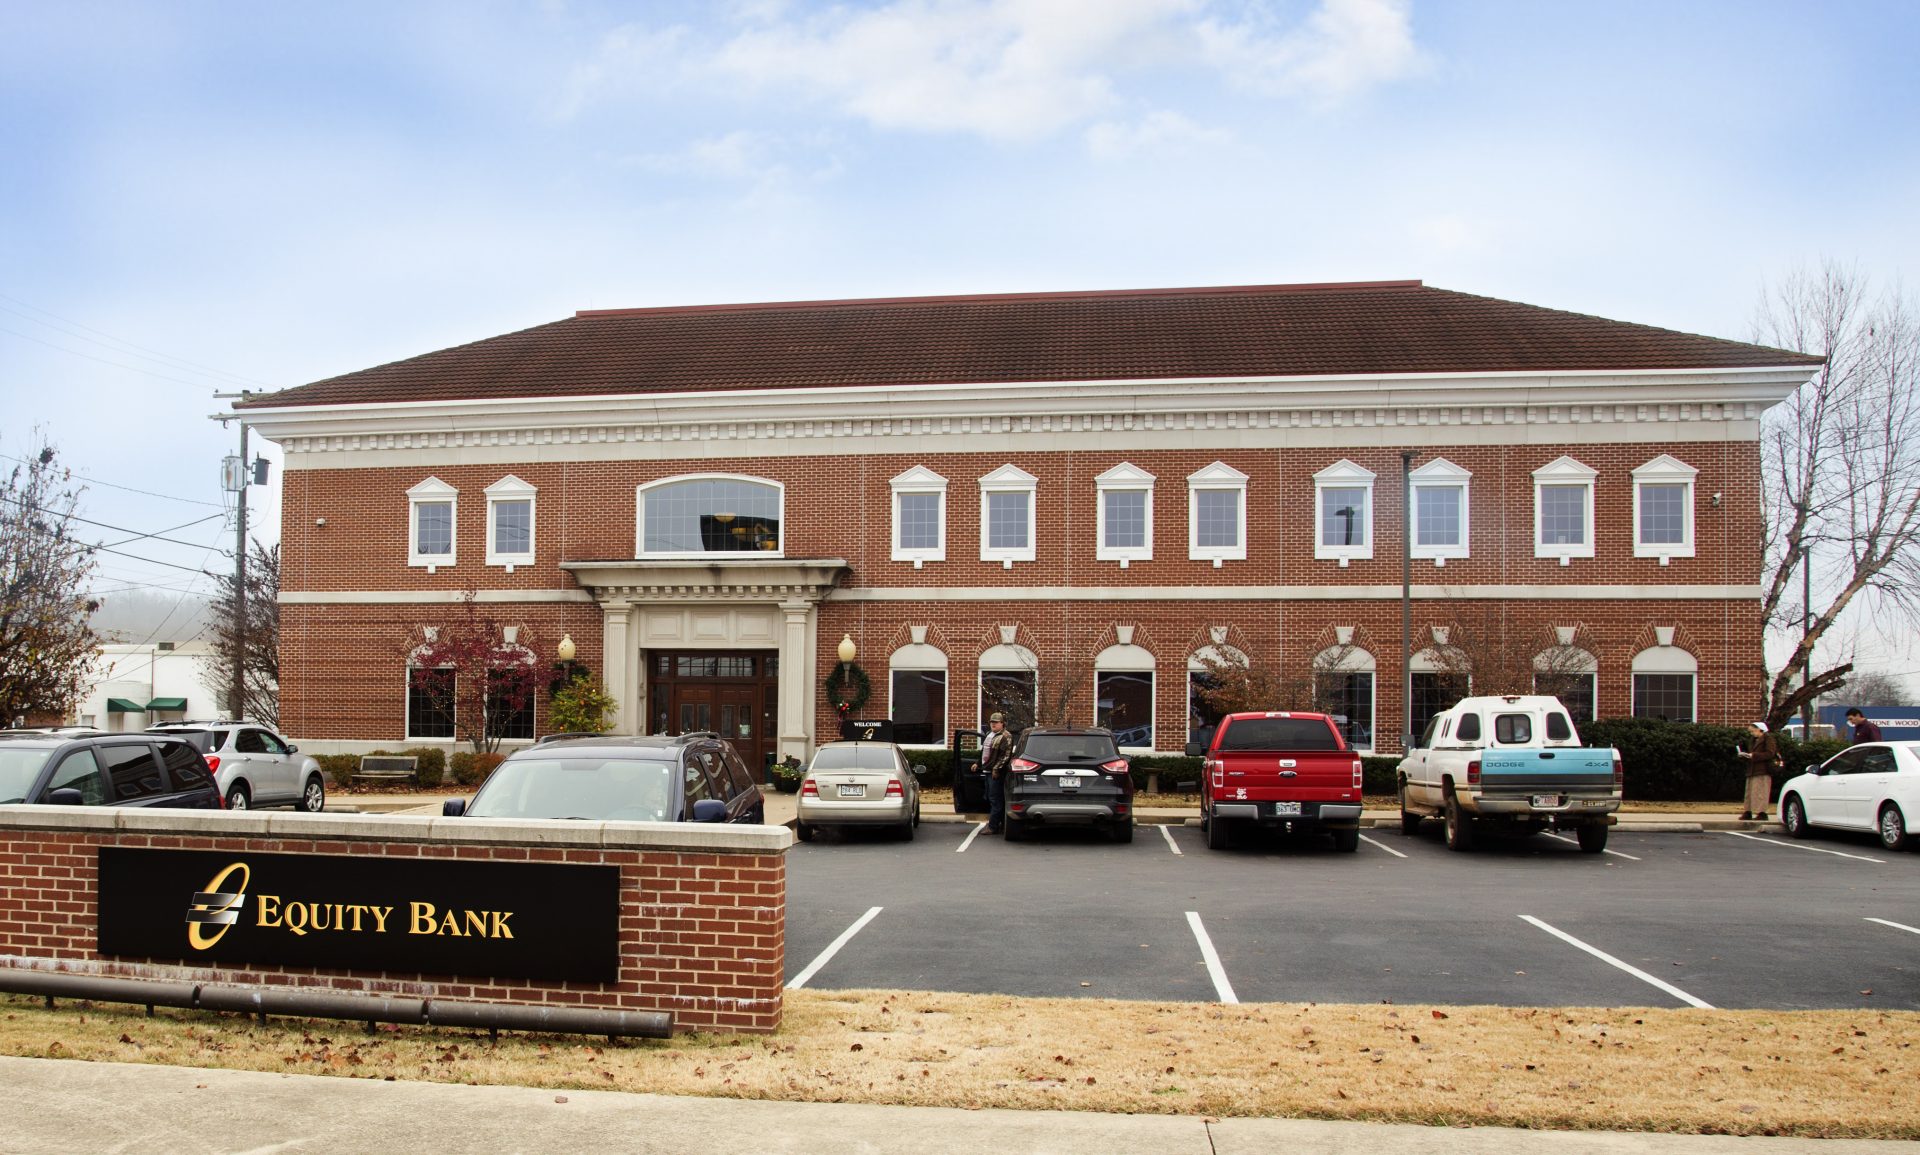 Equity Bank Harris Downtown branch exterior.